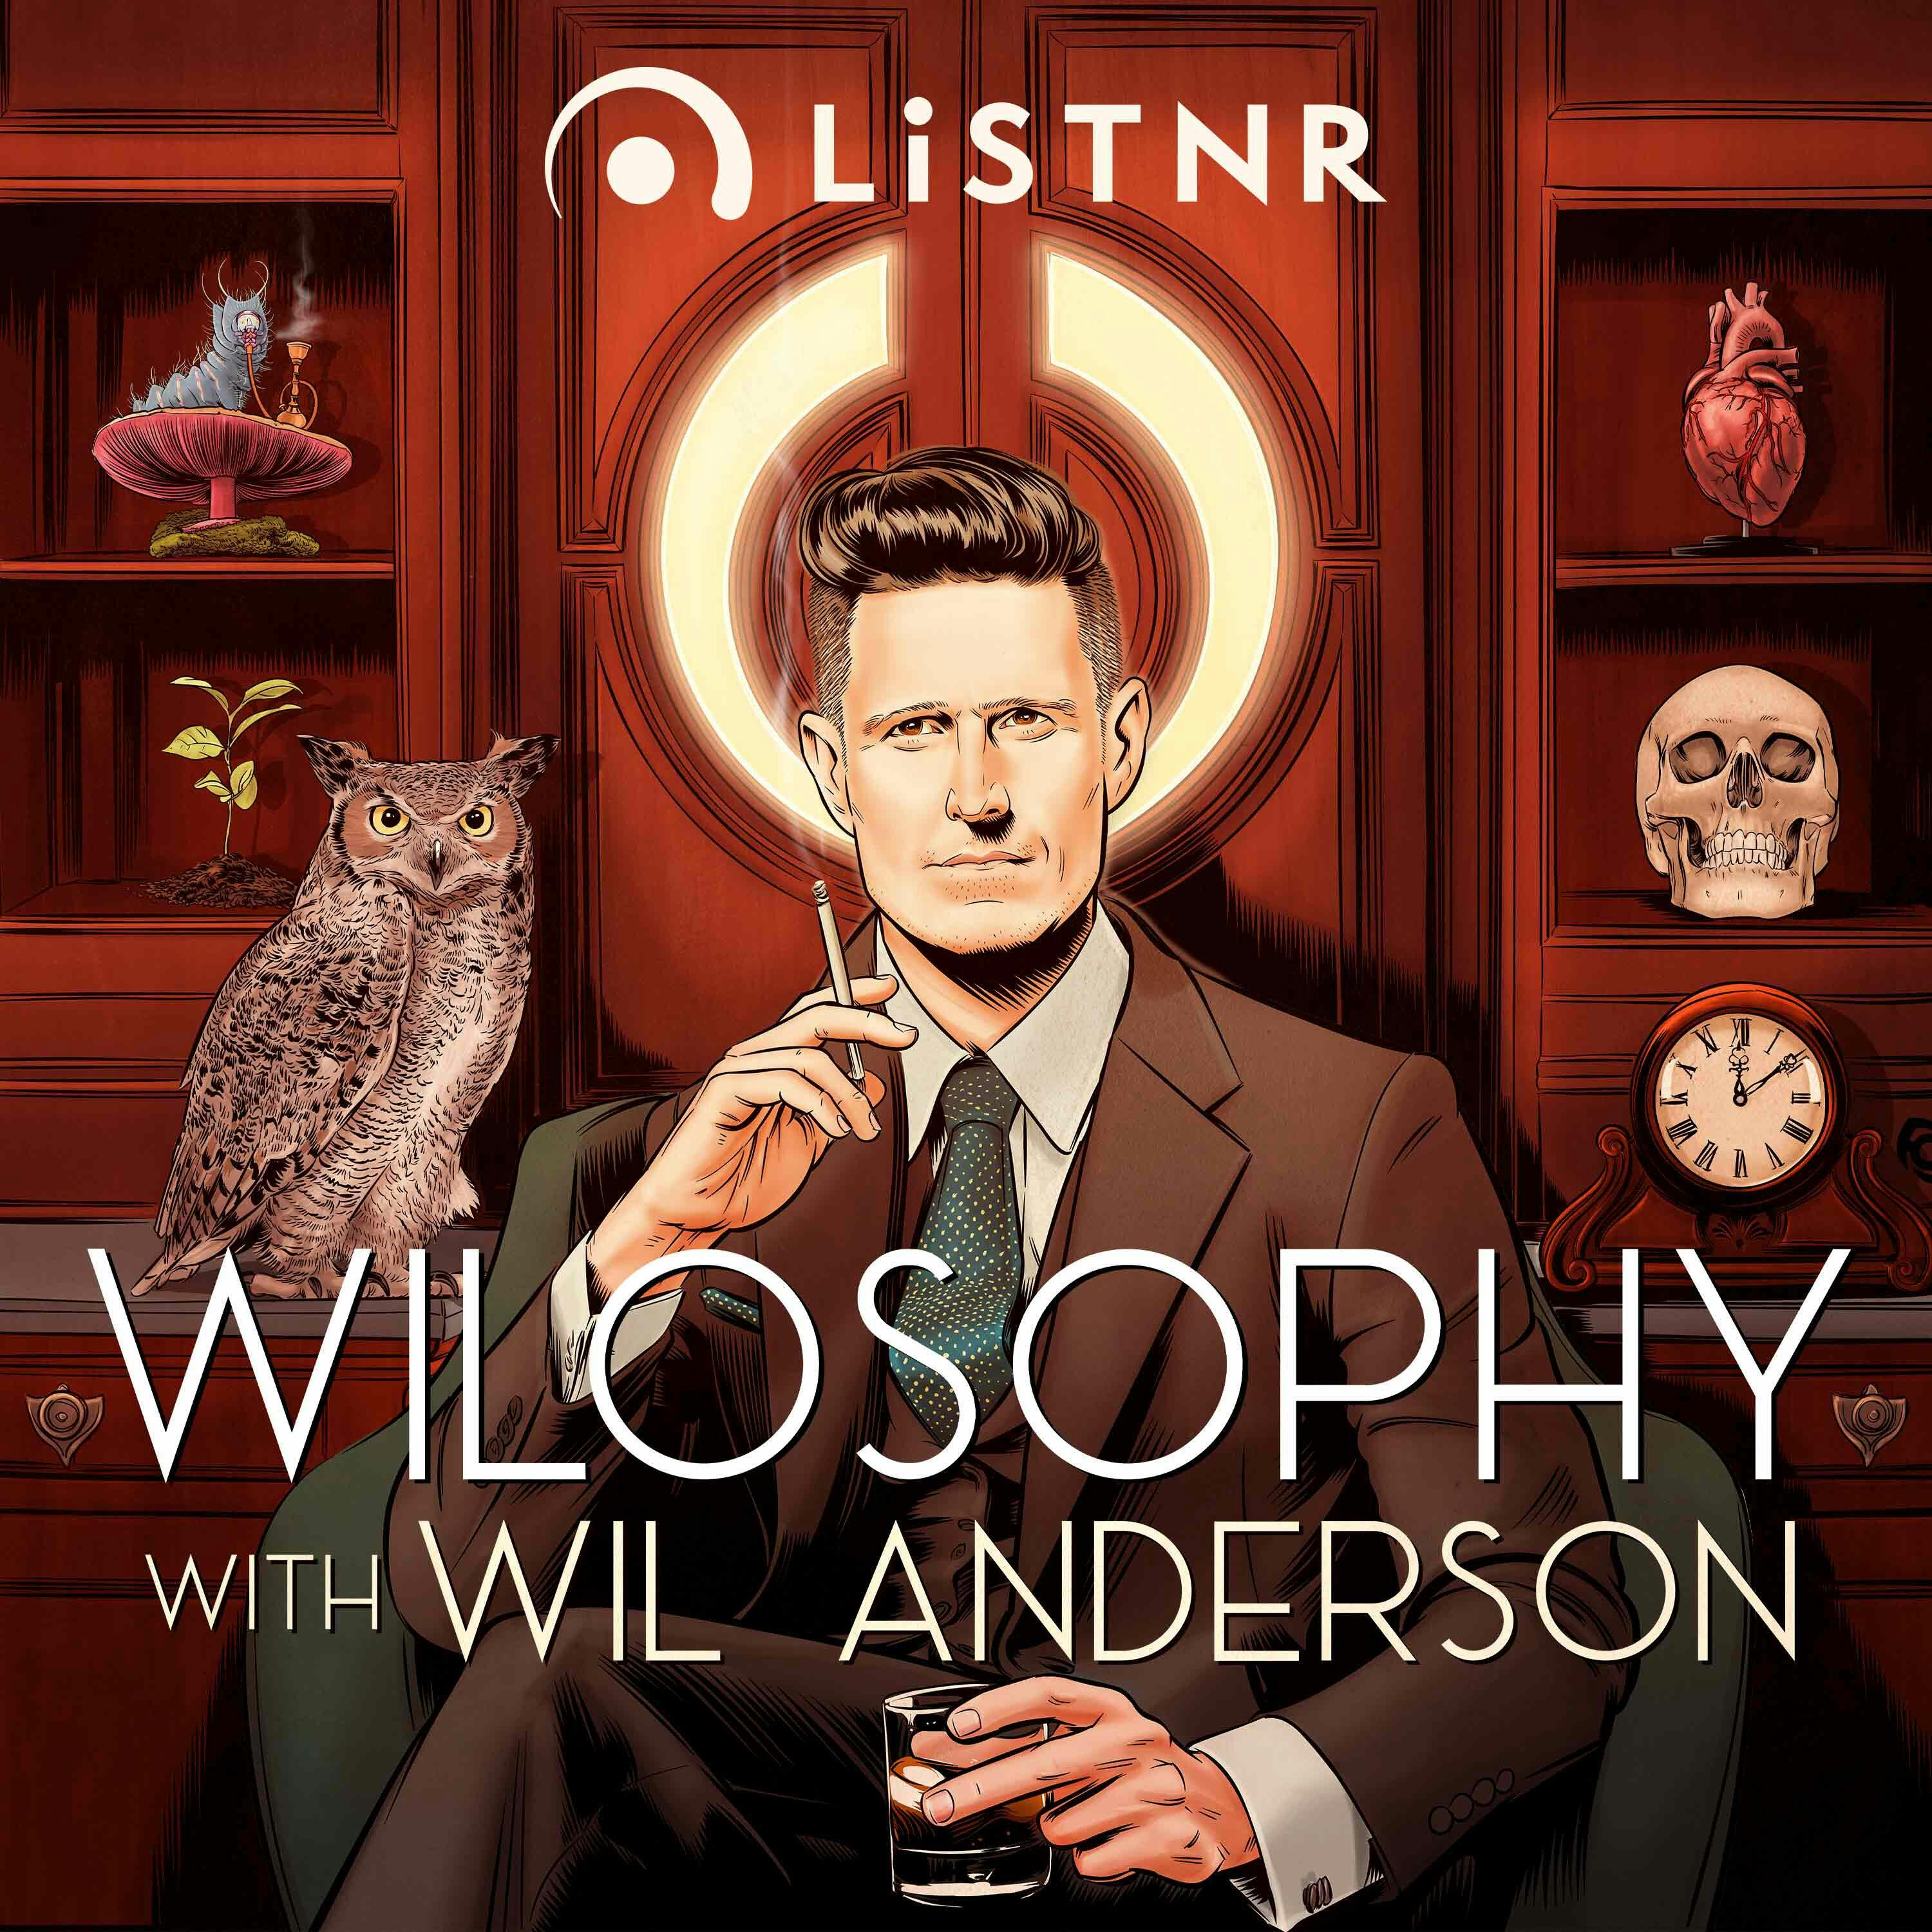 WILOSOPHY with Wil Anderson